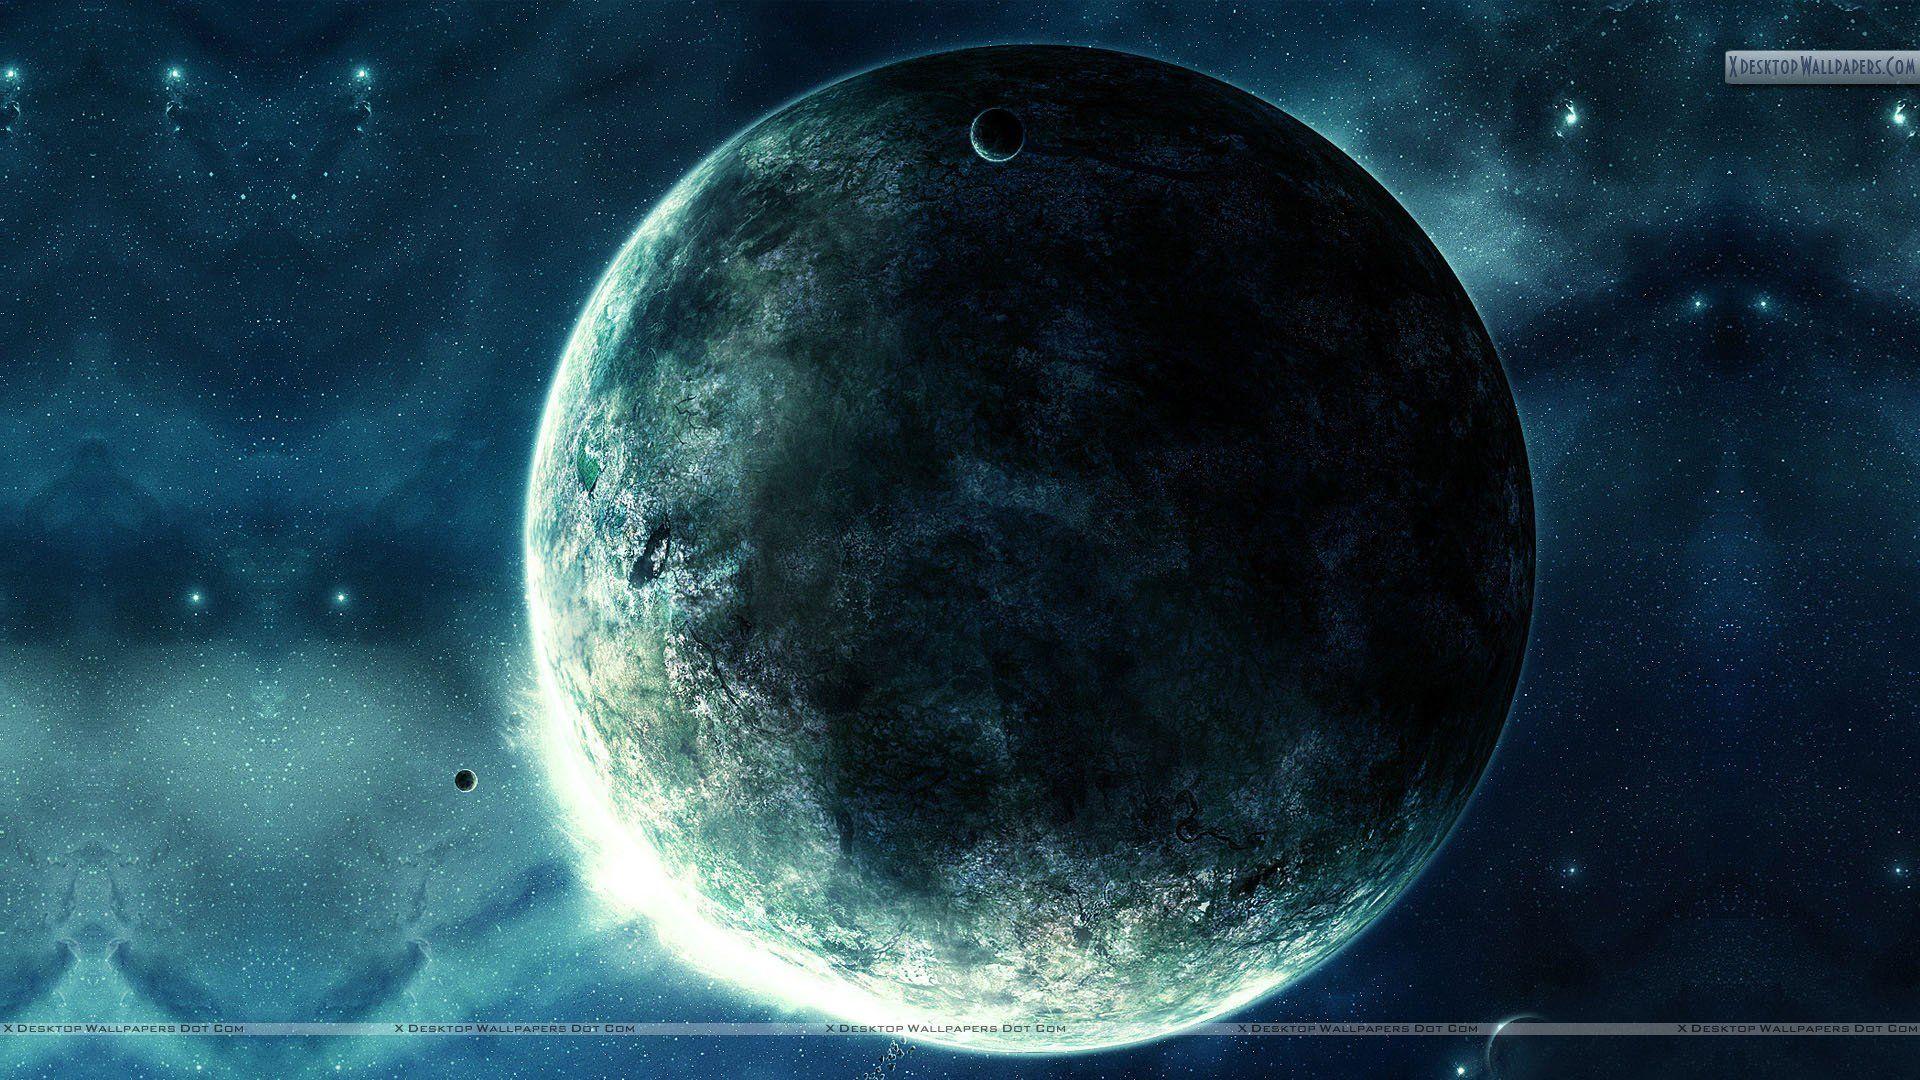 Space Wallpaper: Dark Moon Wallpaper Free with High Resolution